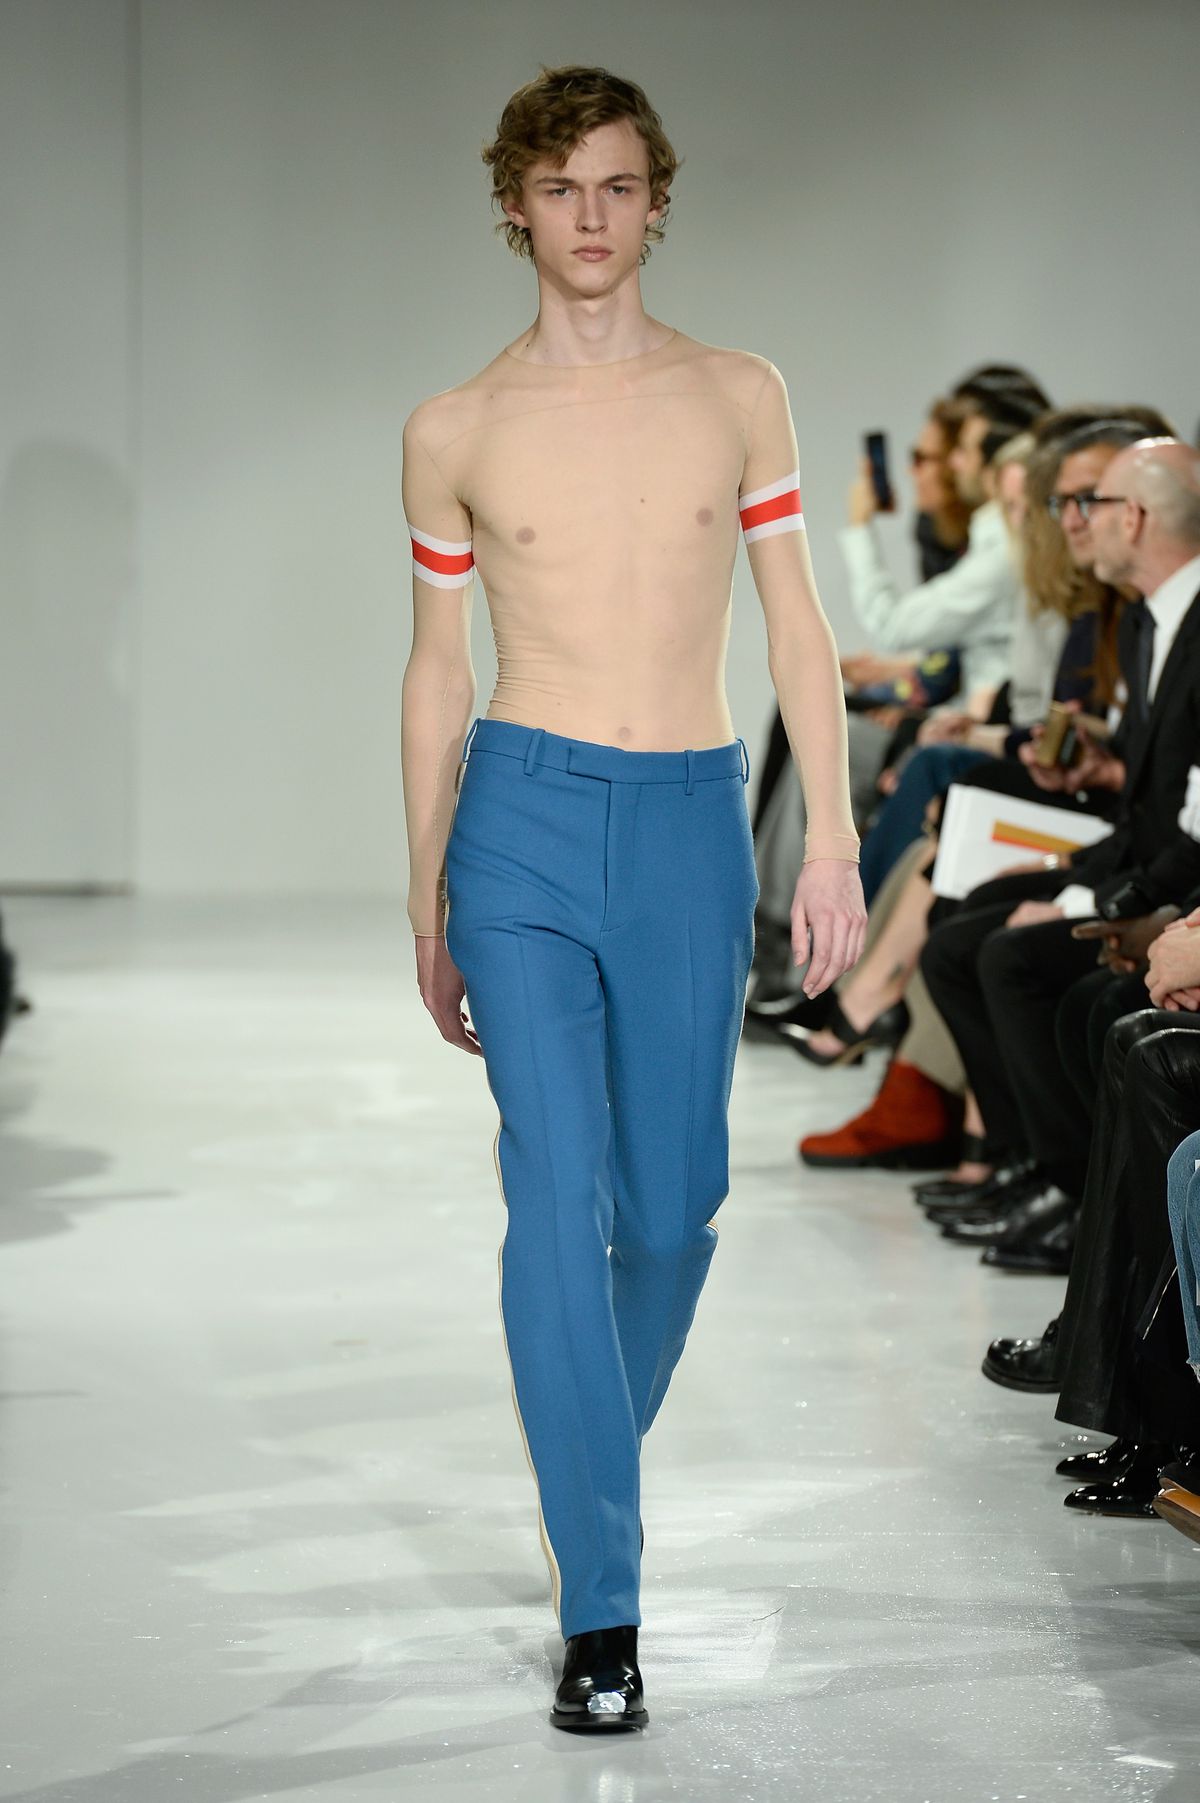 A model wears blue trousers and a transparent shirt with red and white arm bands.